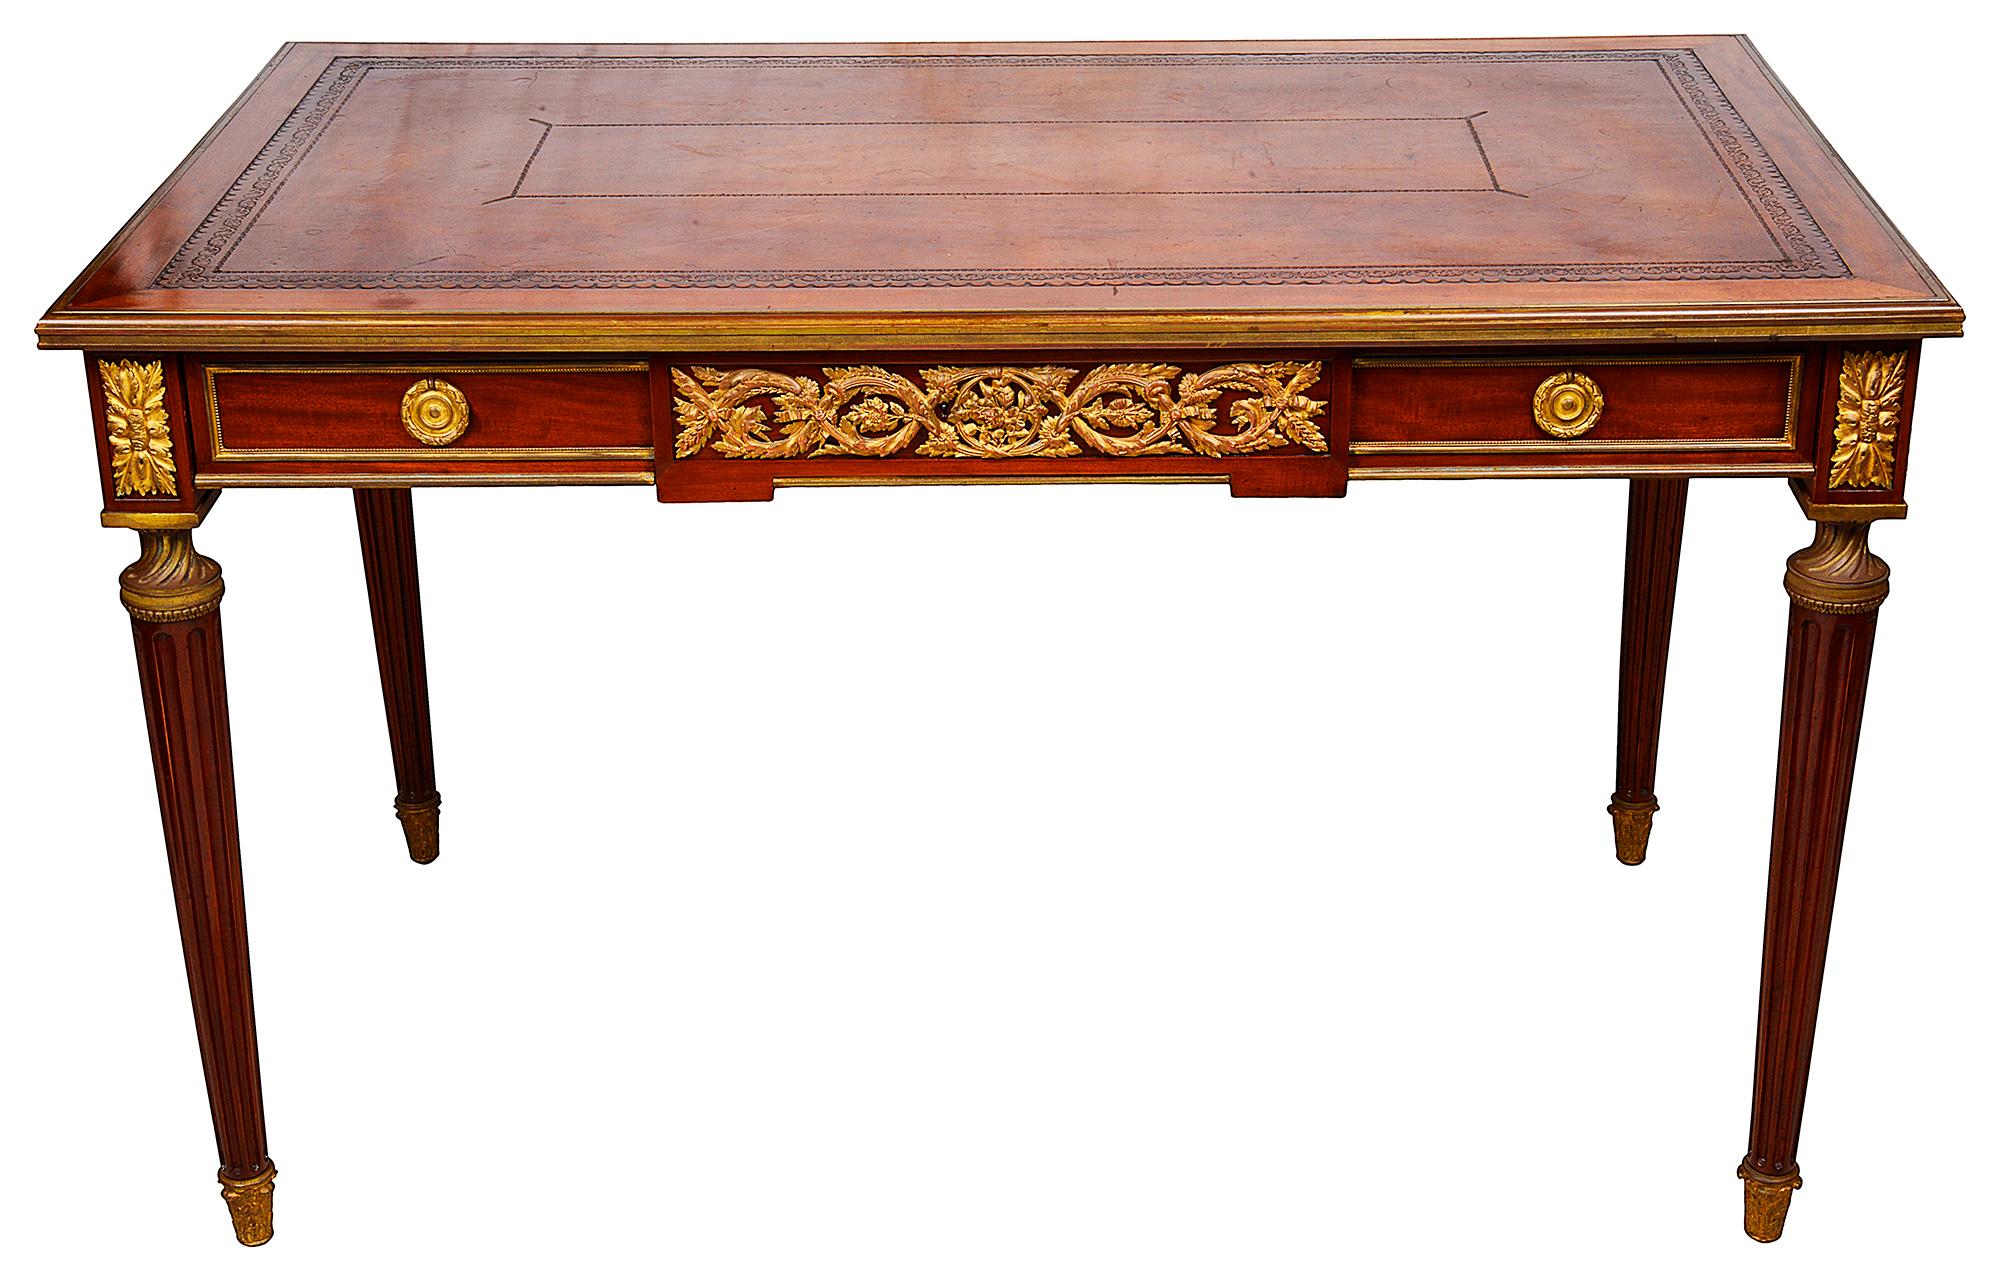 A very good quality 19th century French Louis XVI style mahogany bureau plat. Having an inset leather top, gilded ormolu mouldings and scrolling foliate mounts to the frieze, two frieze drawers and raised on turned tapering fluted legs, terminating